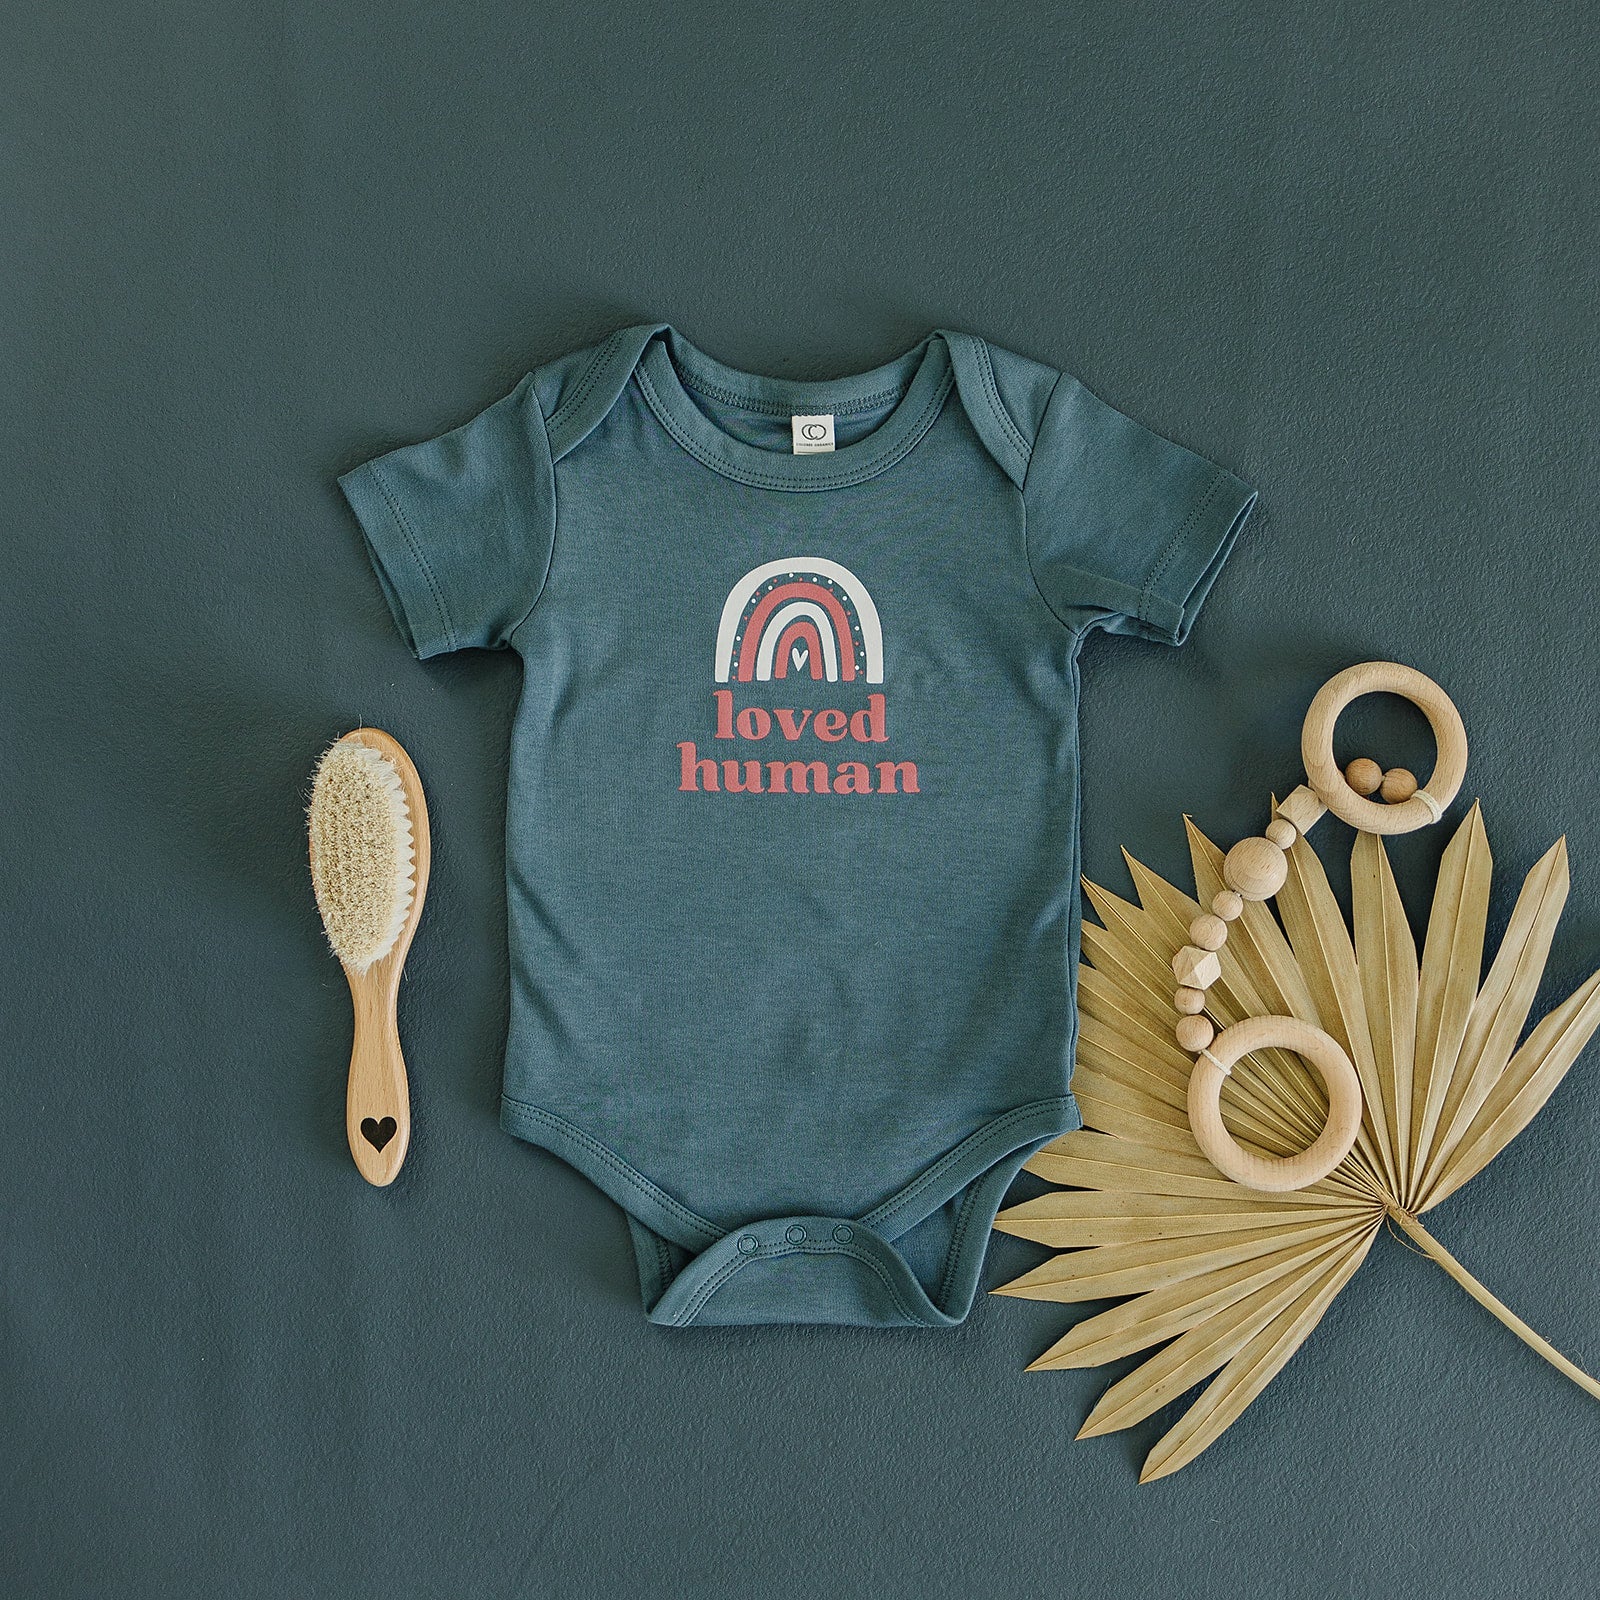 Slate grey baby onesie with 'loved human' and rainbow print, accompanied by a natural bristle brush and wooden teething toys on a dark teal background